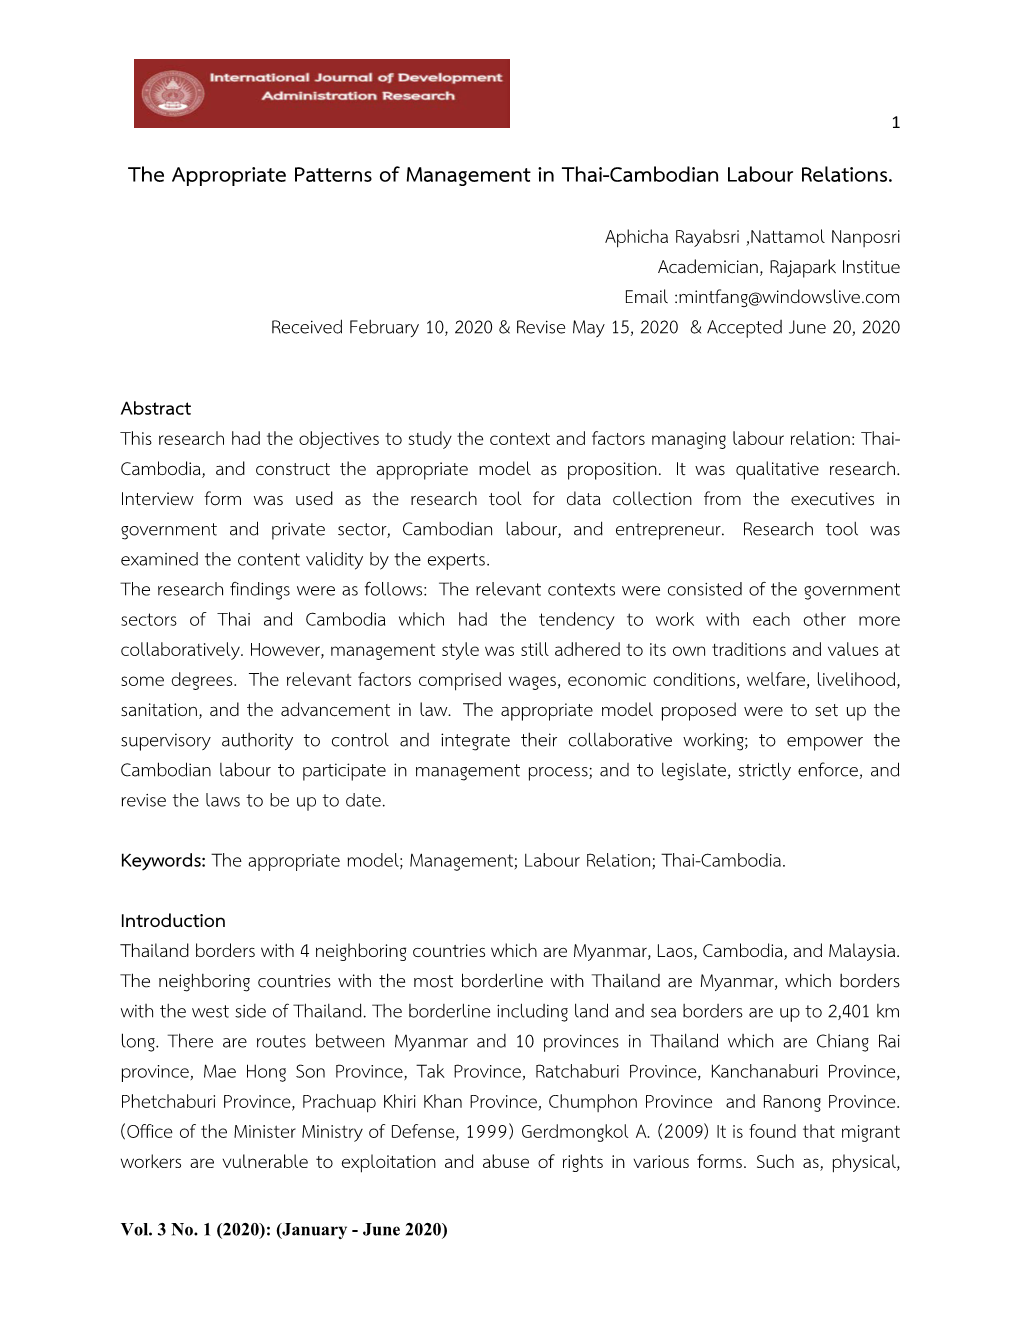 The Appropriate Patterns of Management in Thai-Cambodian Labour Relations